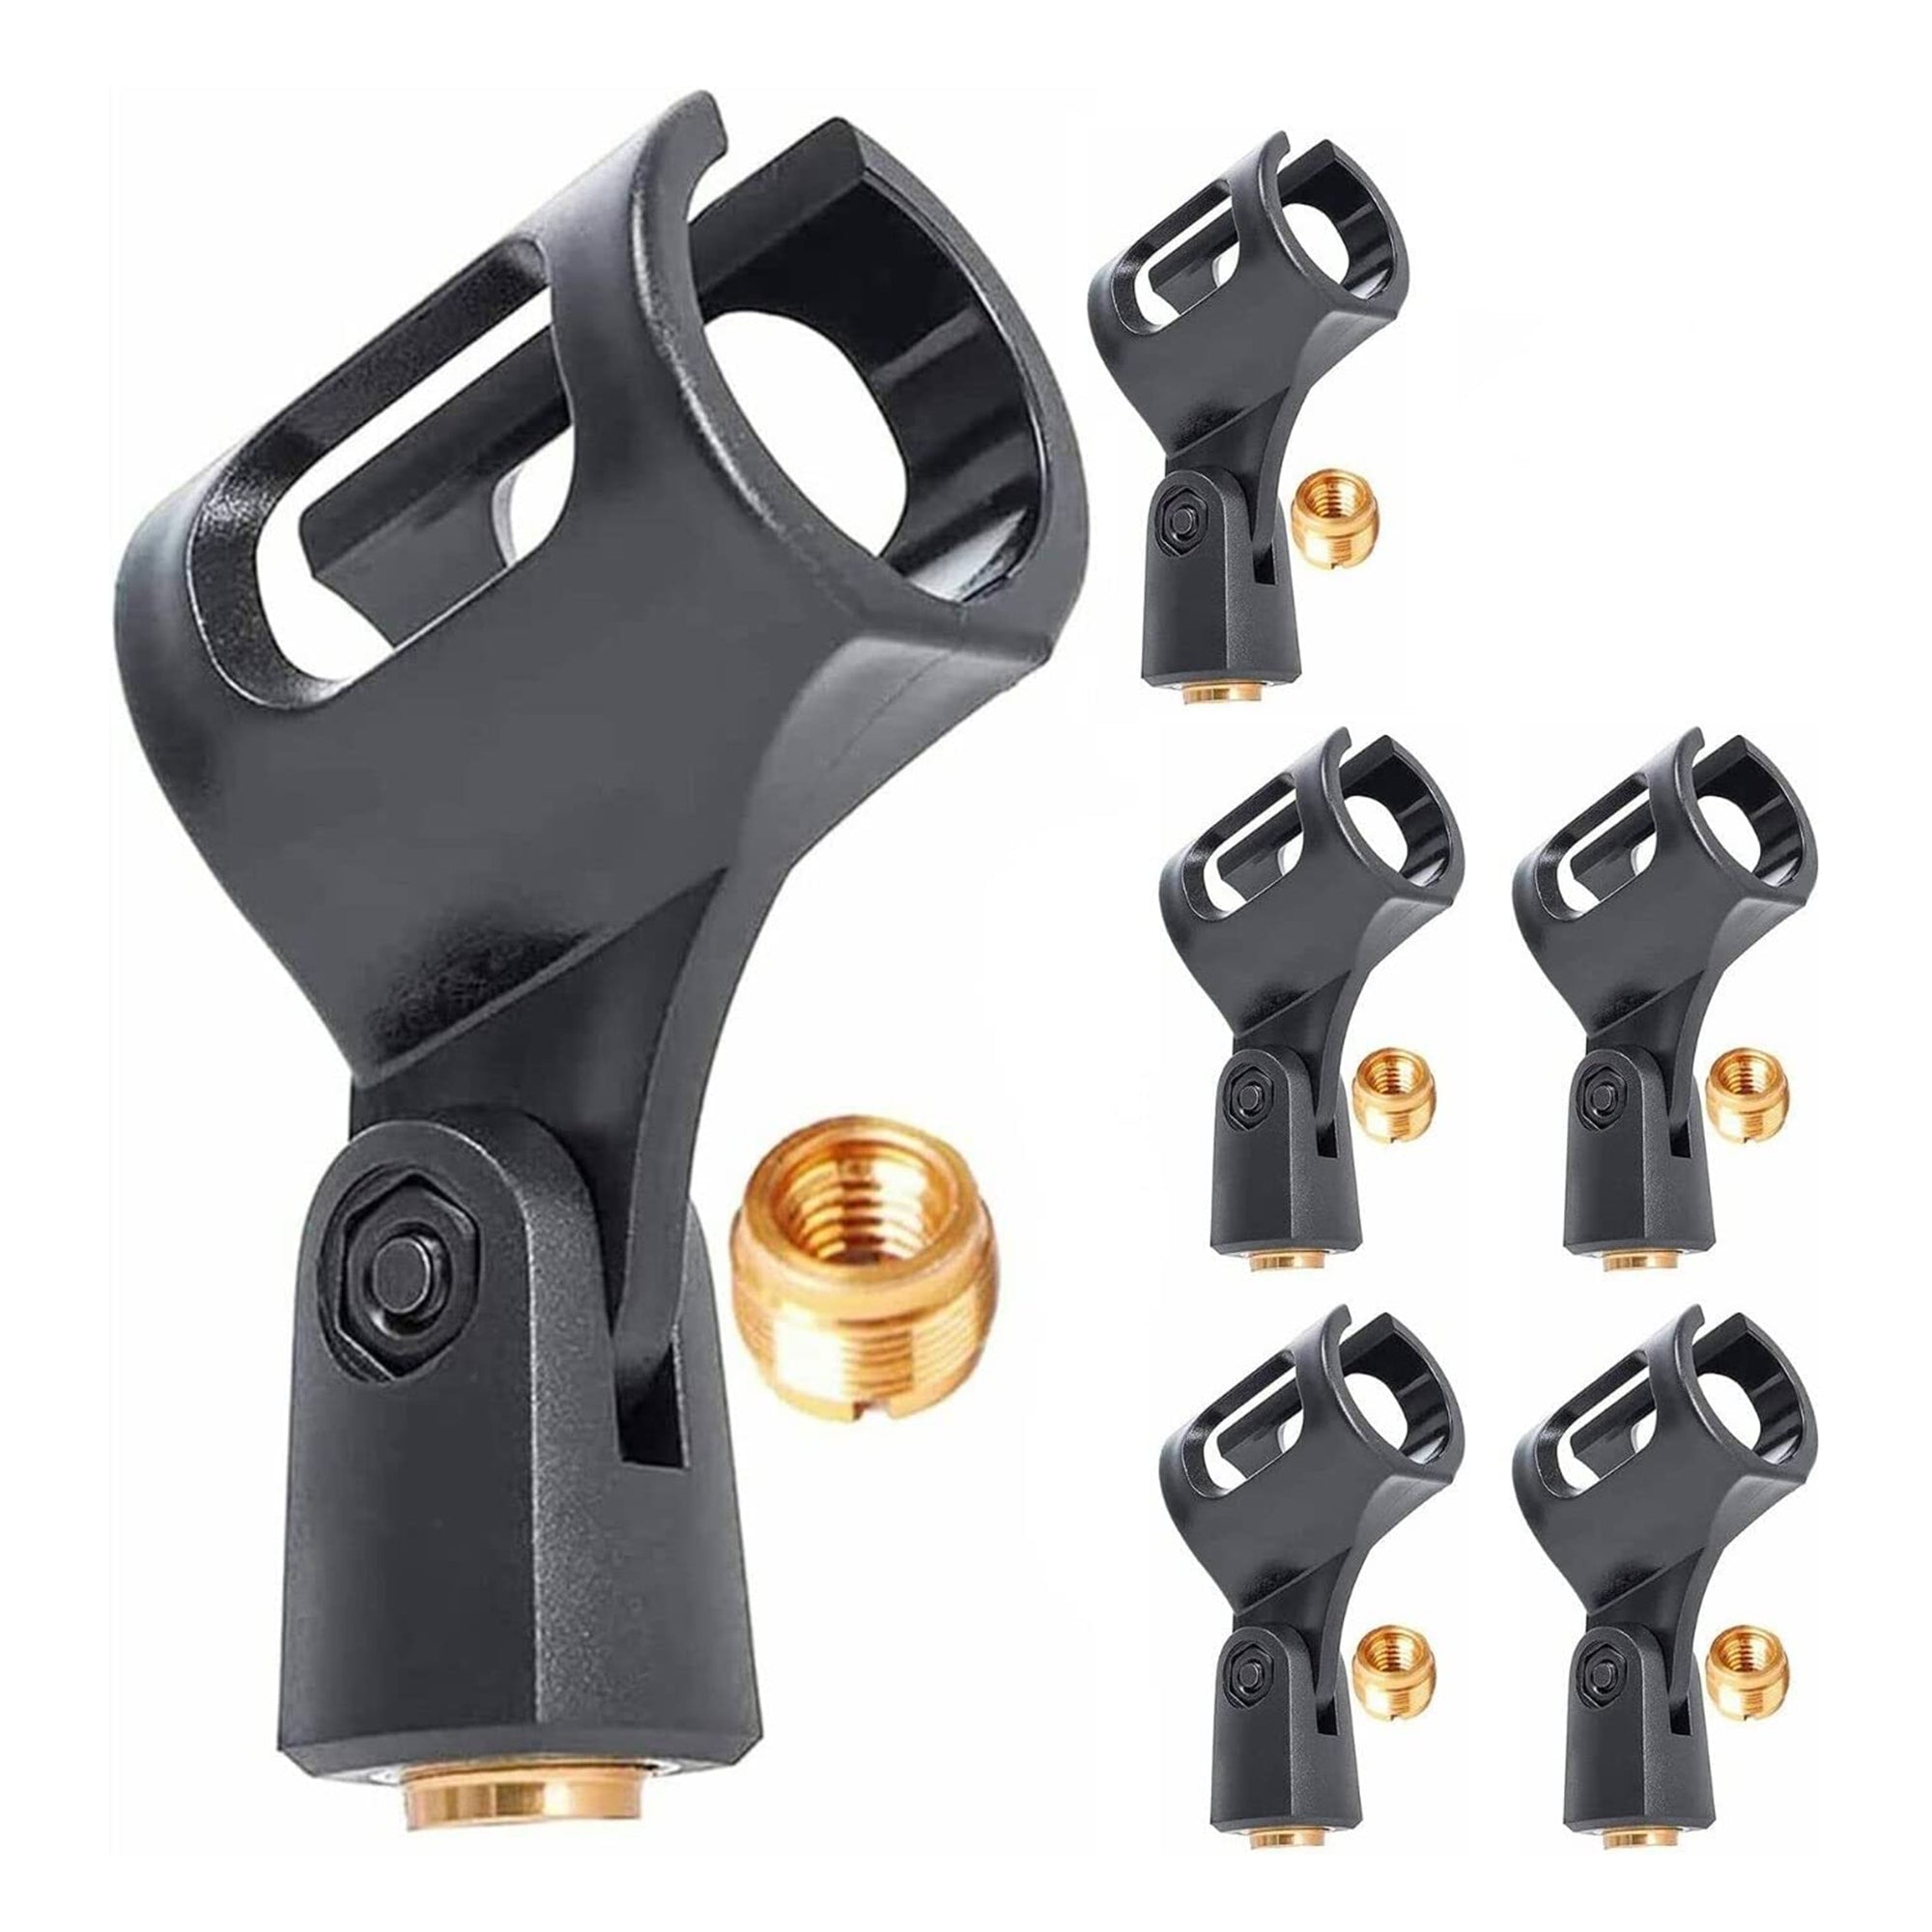 5 Core Microphone Clips Large Barrel Style Mic Holder Adjustable Angle for all Handheld Transmitters such as Sm57 Sm58 Sm86 Sm87 - MC-01 6PCS